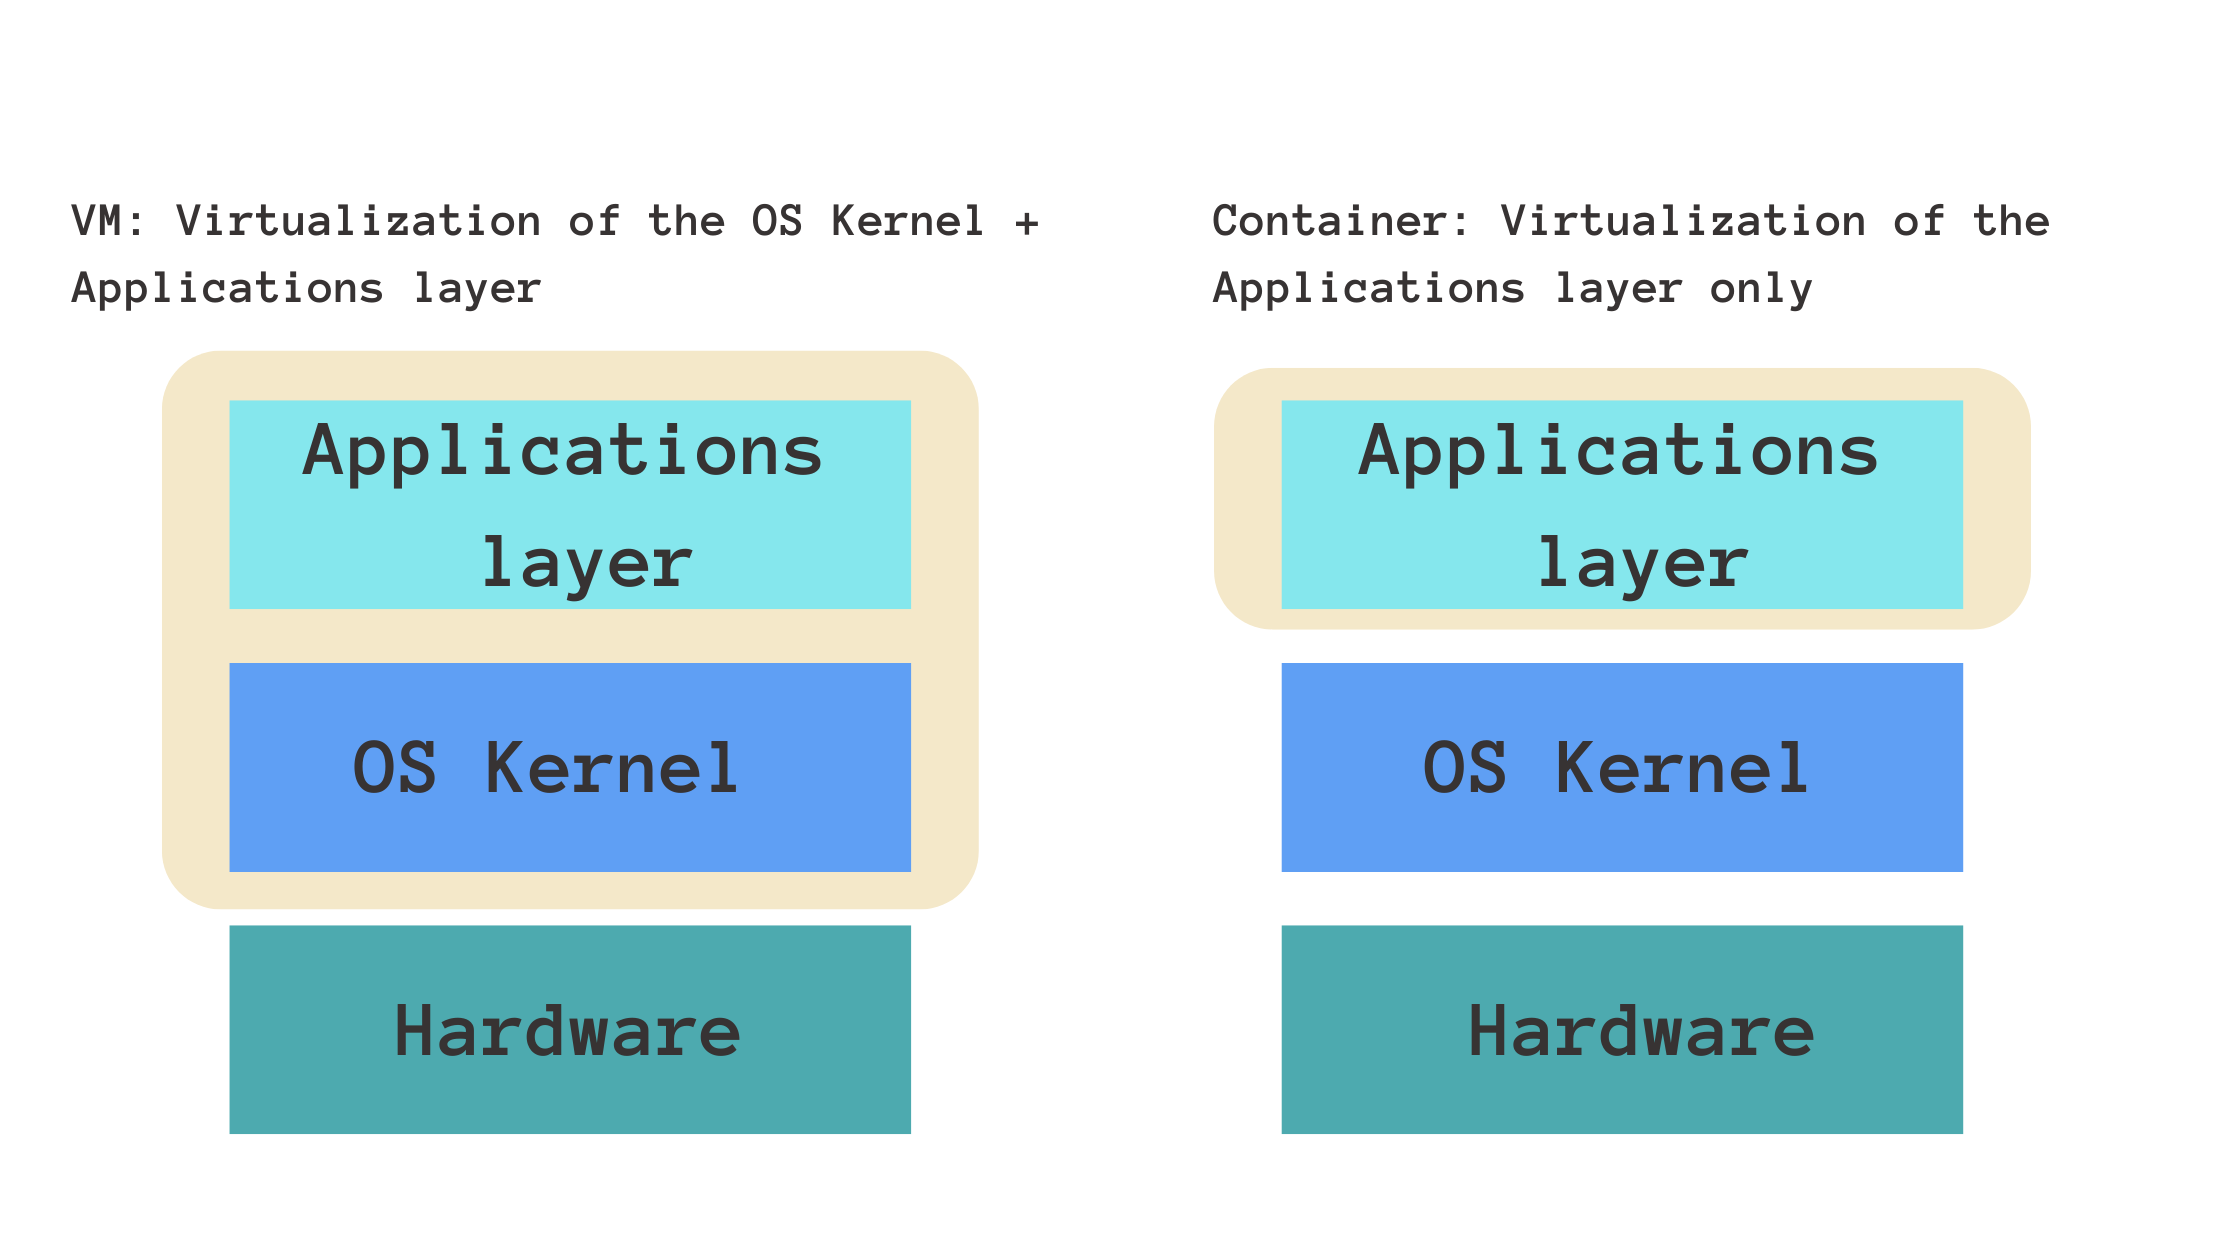 Kernel is the Difference